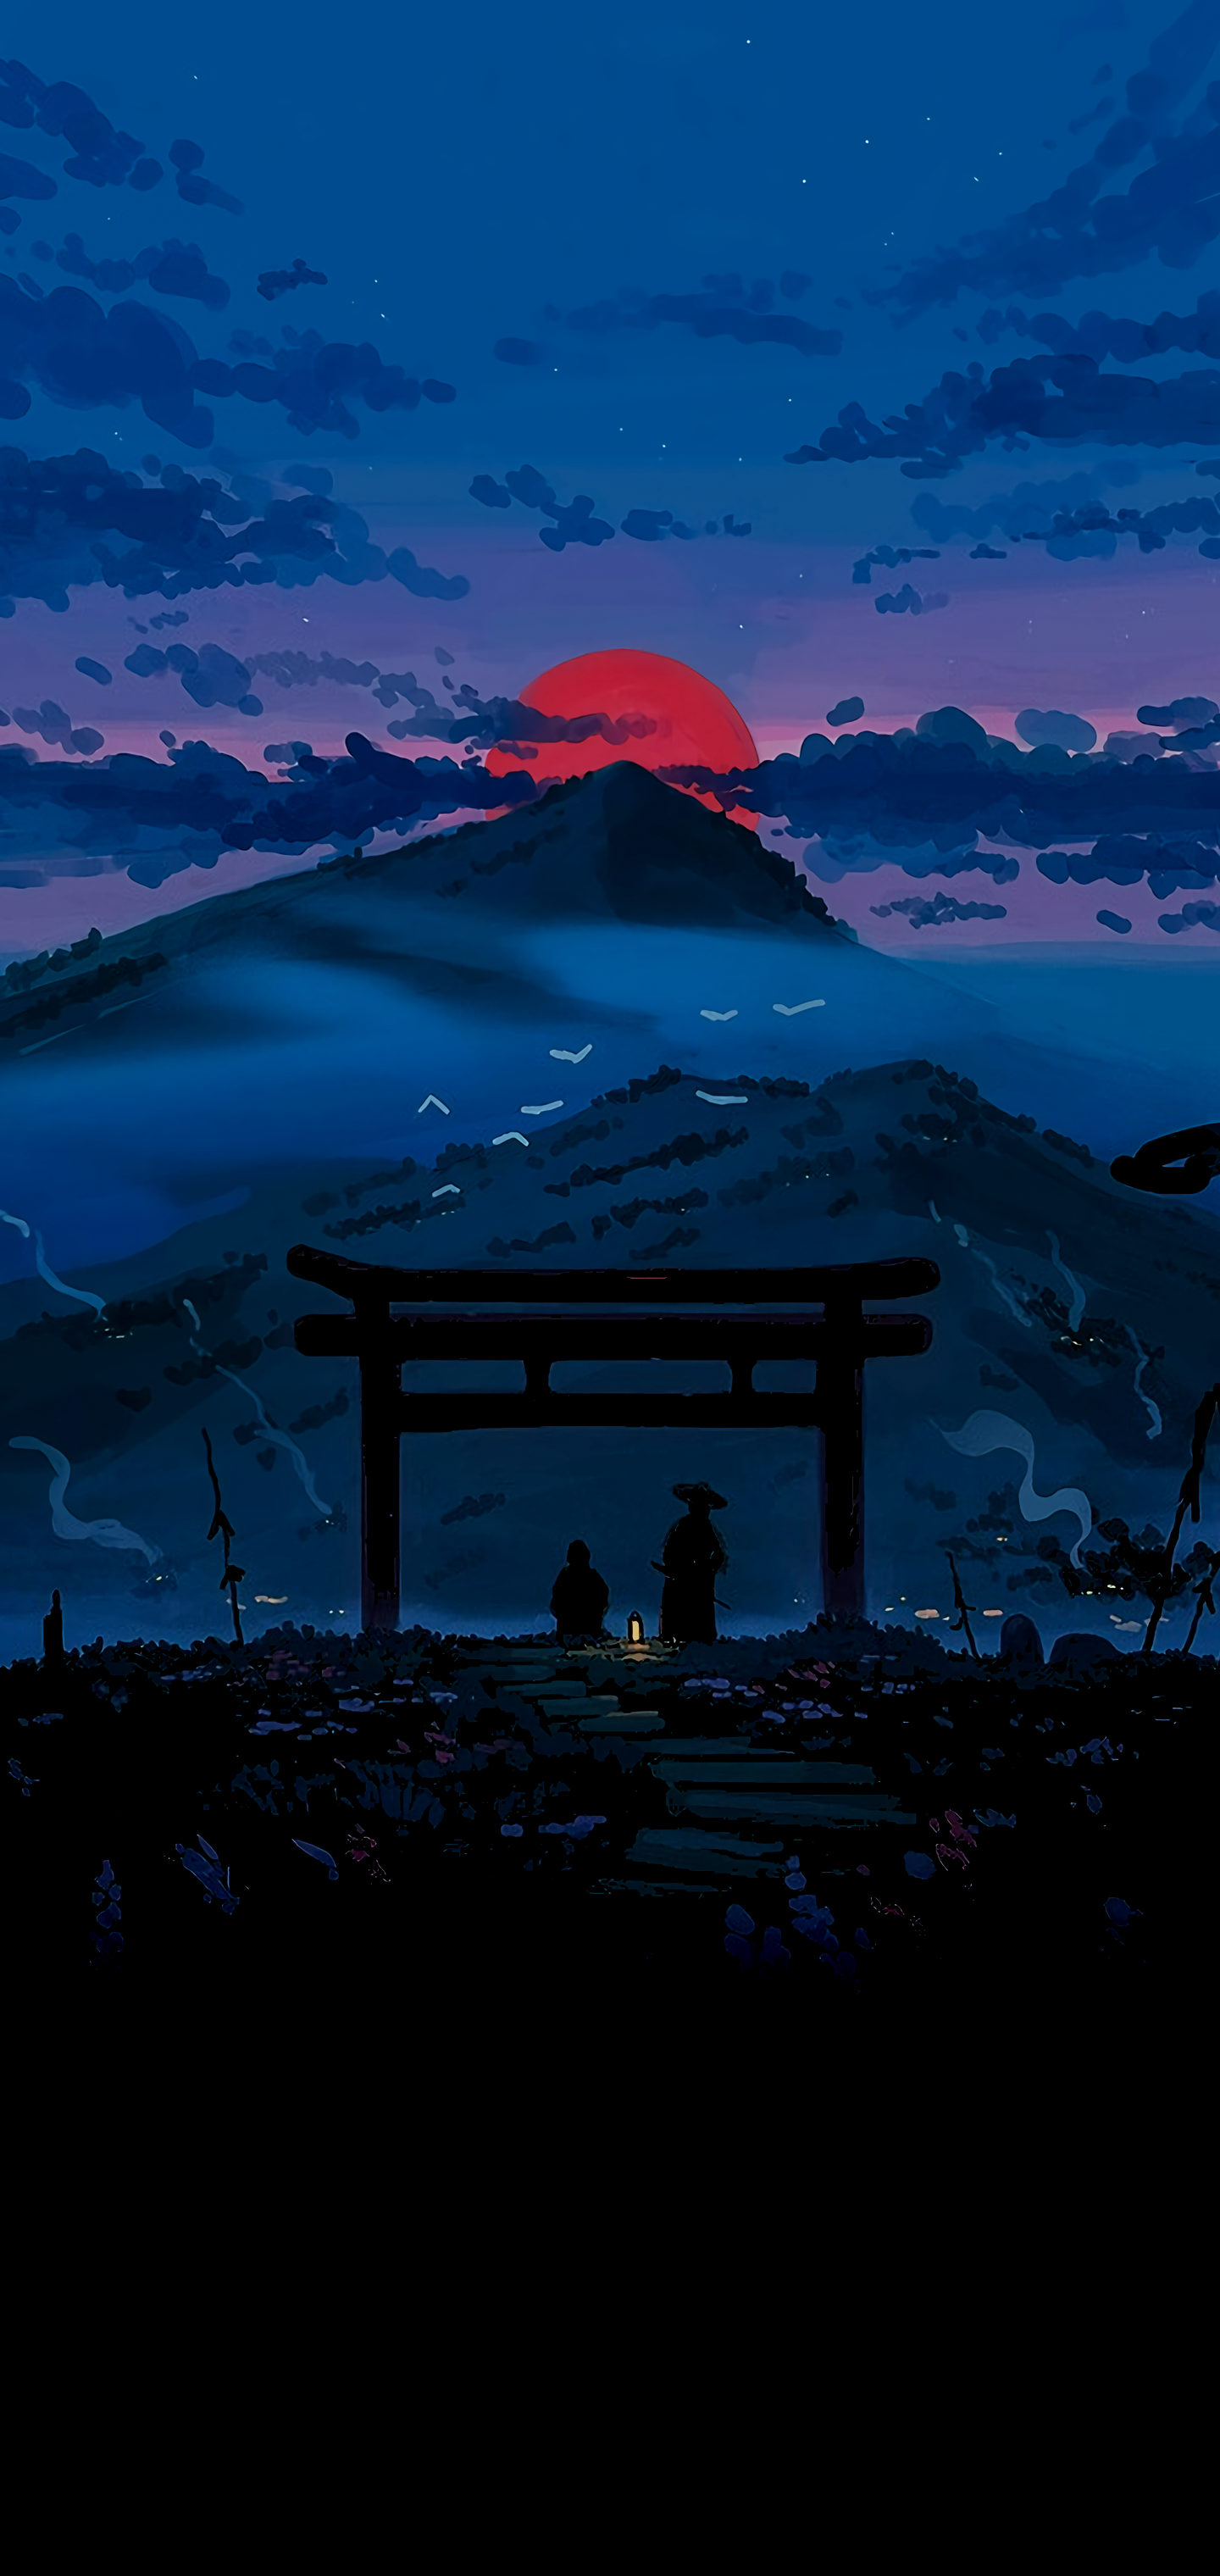 Ghost of Tsushima wallpaper pourportable (1440x3040) - gydw1n 